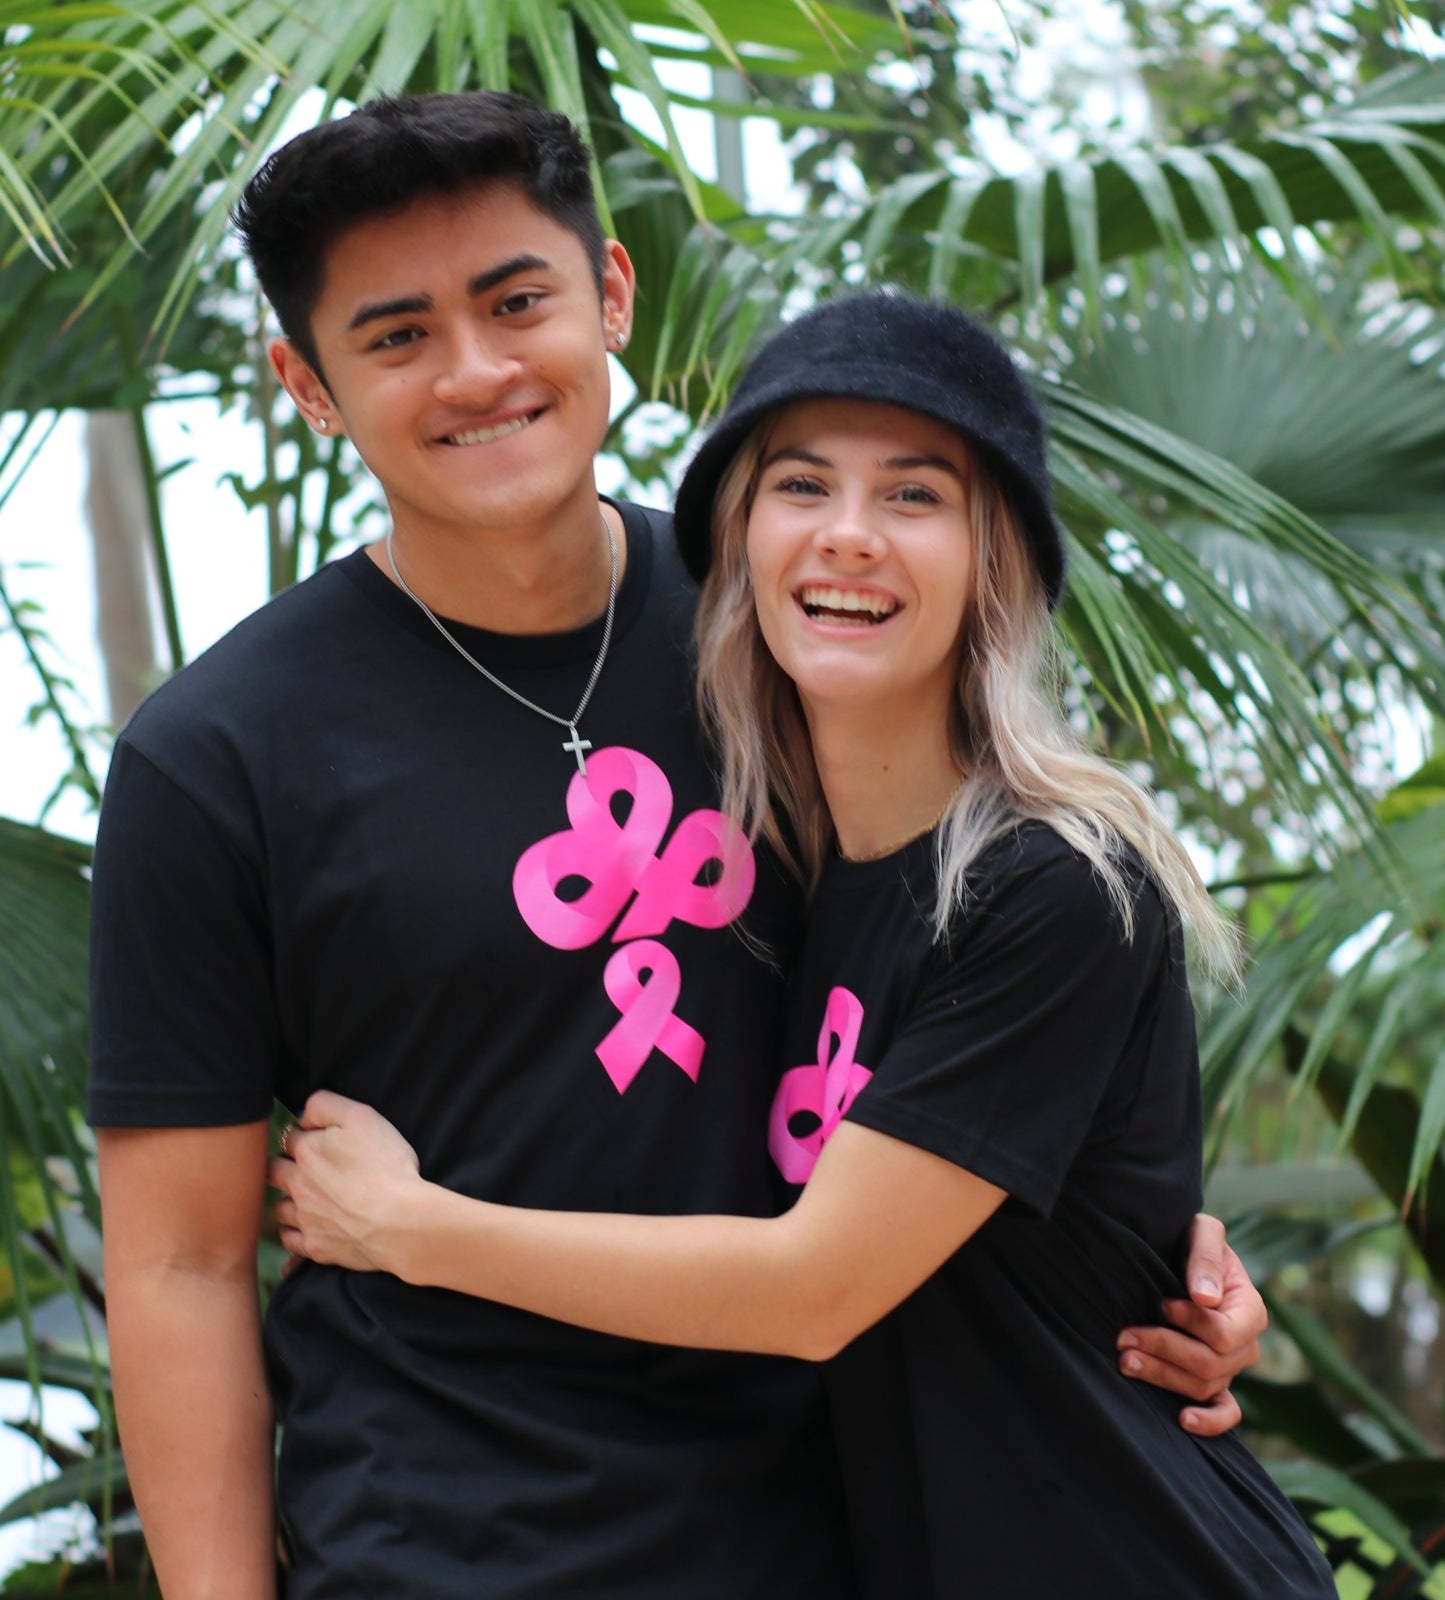 Help Fight Breast Cancer with the purchase of the IBP Ireland Boys pink ribbon logo on black nextlevel t-shirt worn by Ricky Ireland and Morgan of Ireland Boys Productions